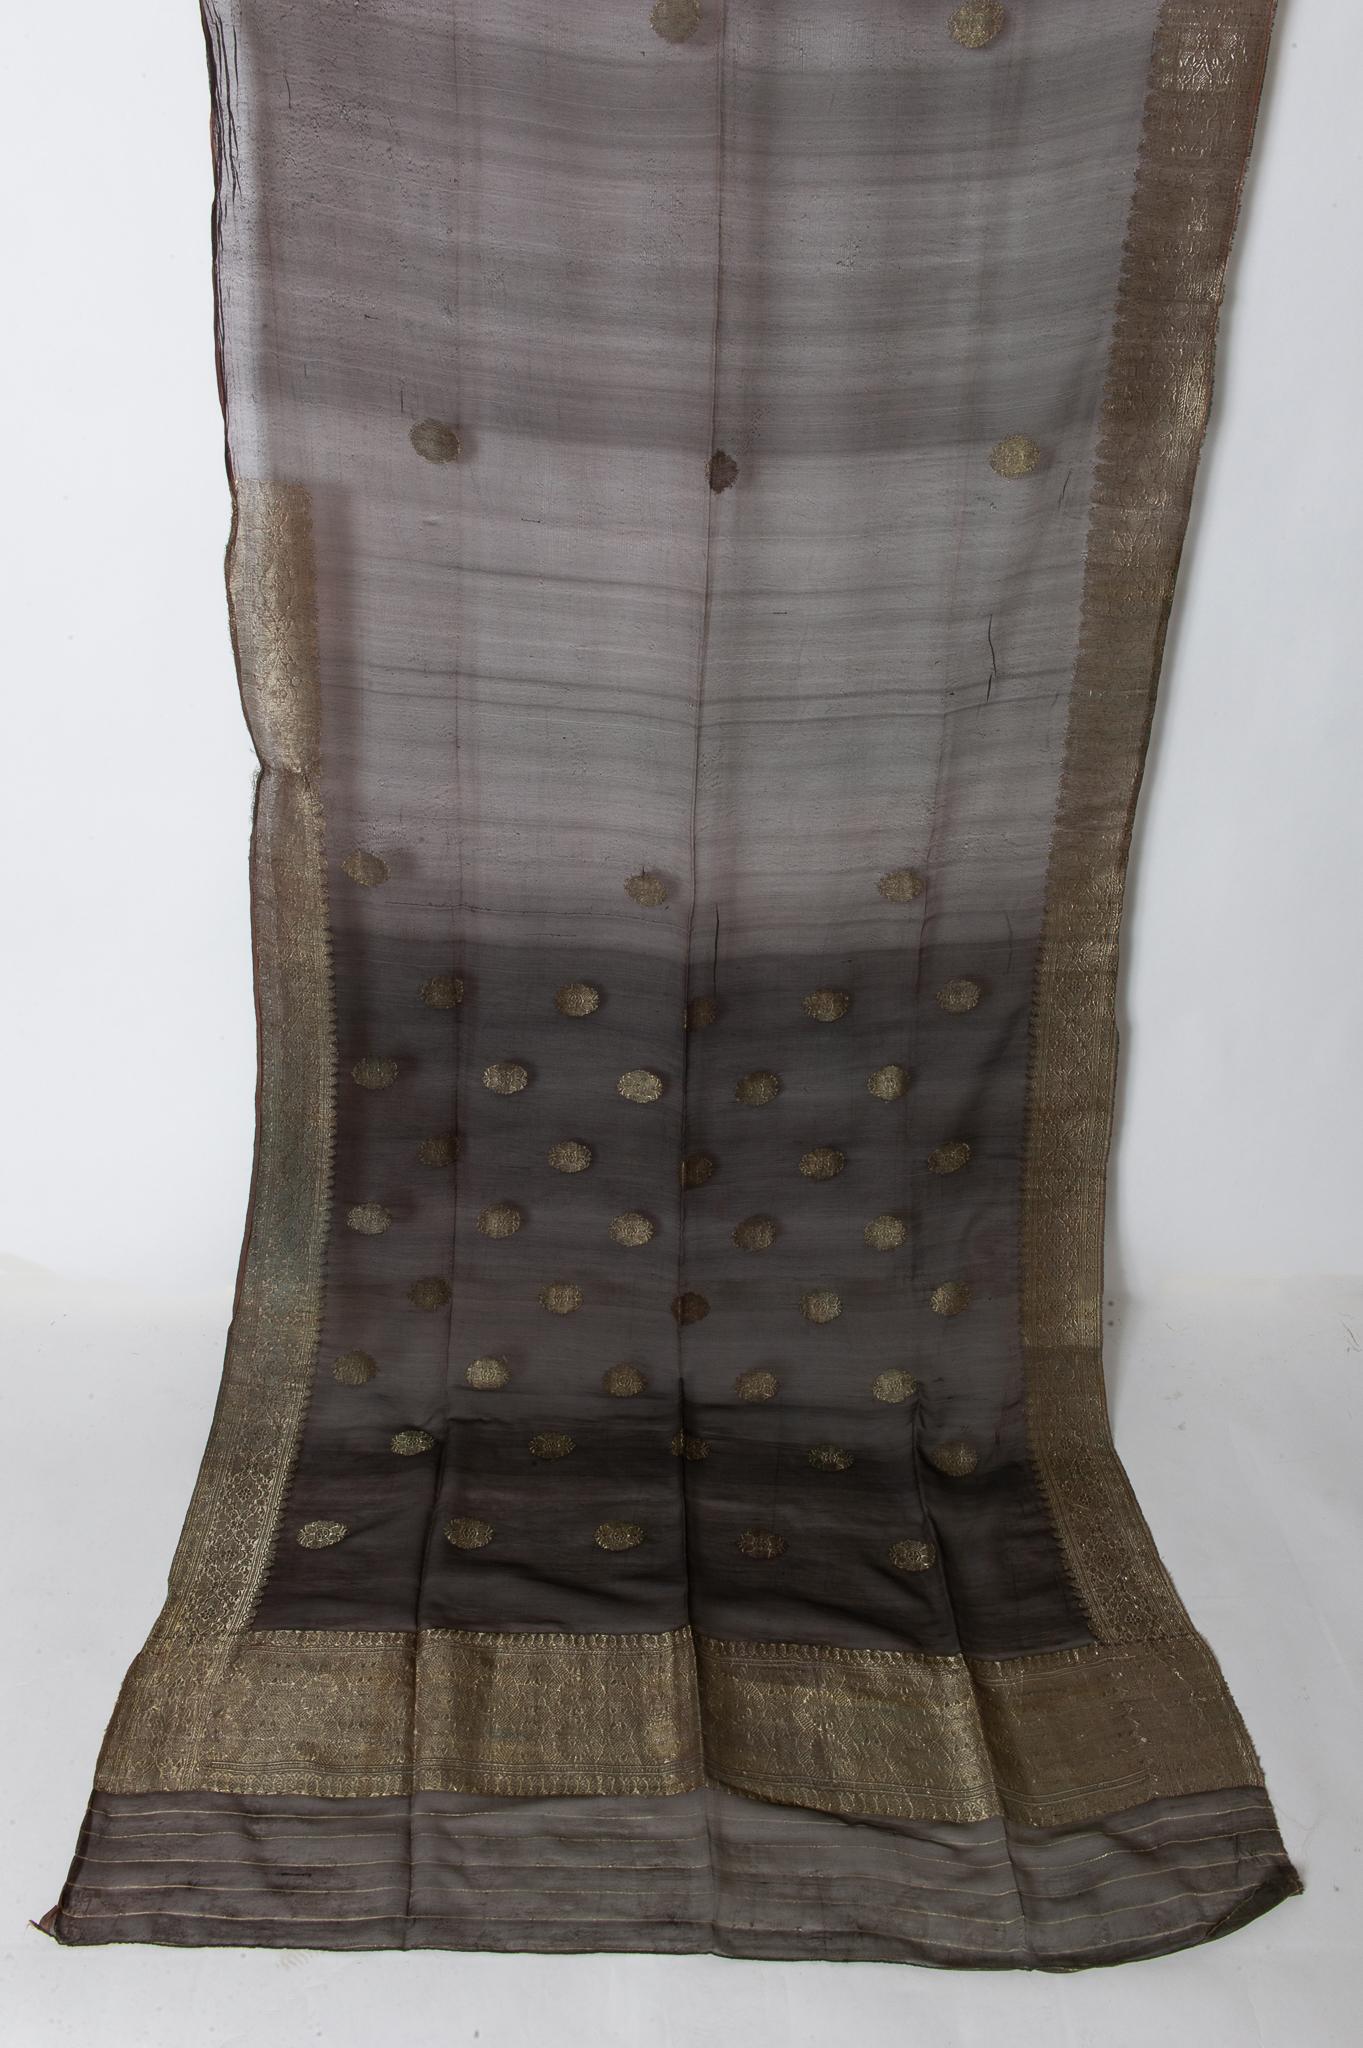 Hand-Woven Vintage Indian Sari Dark Brown Color, Unusual Curtains or an Evening Dress